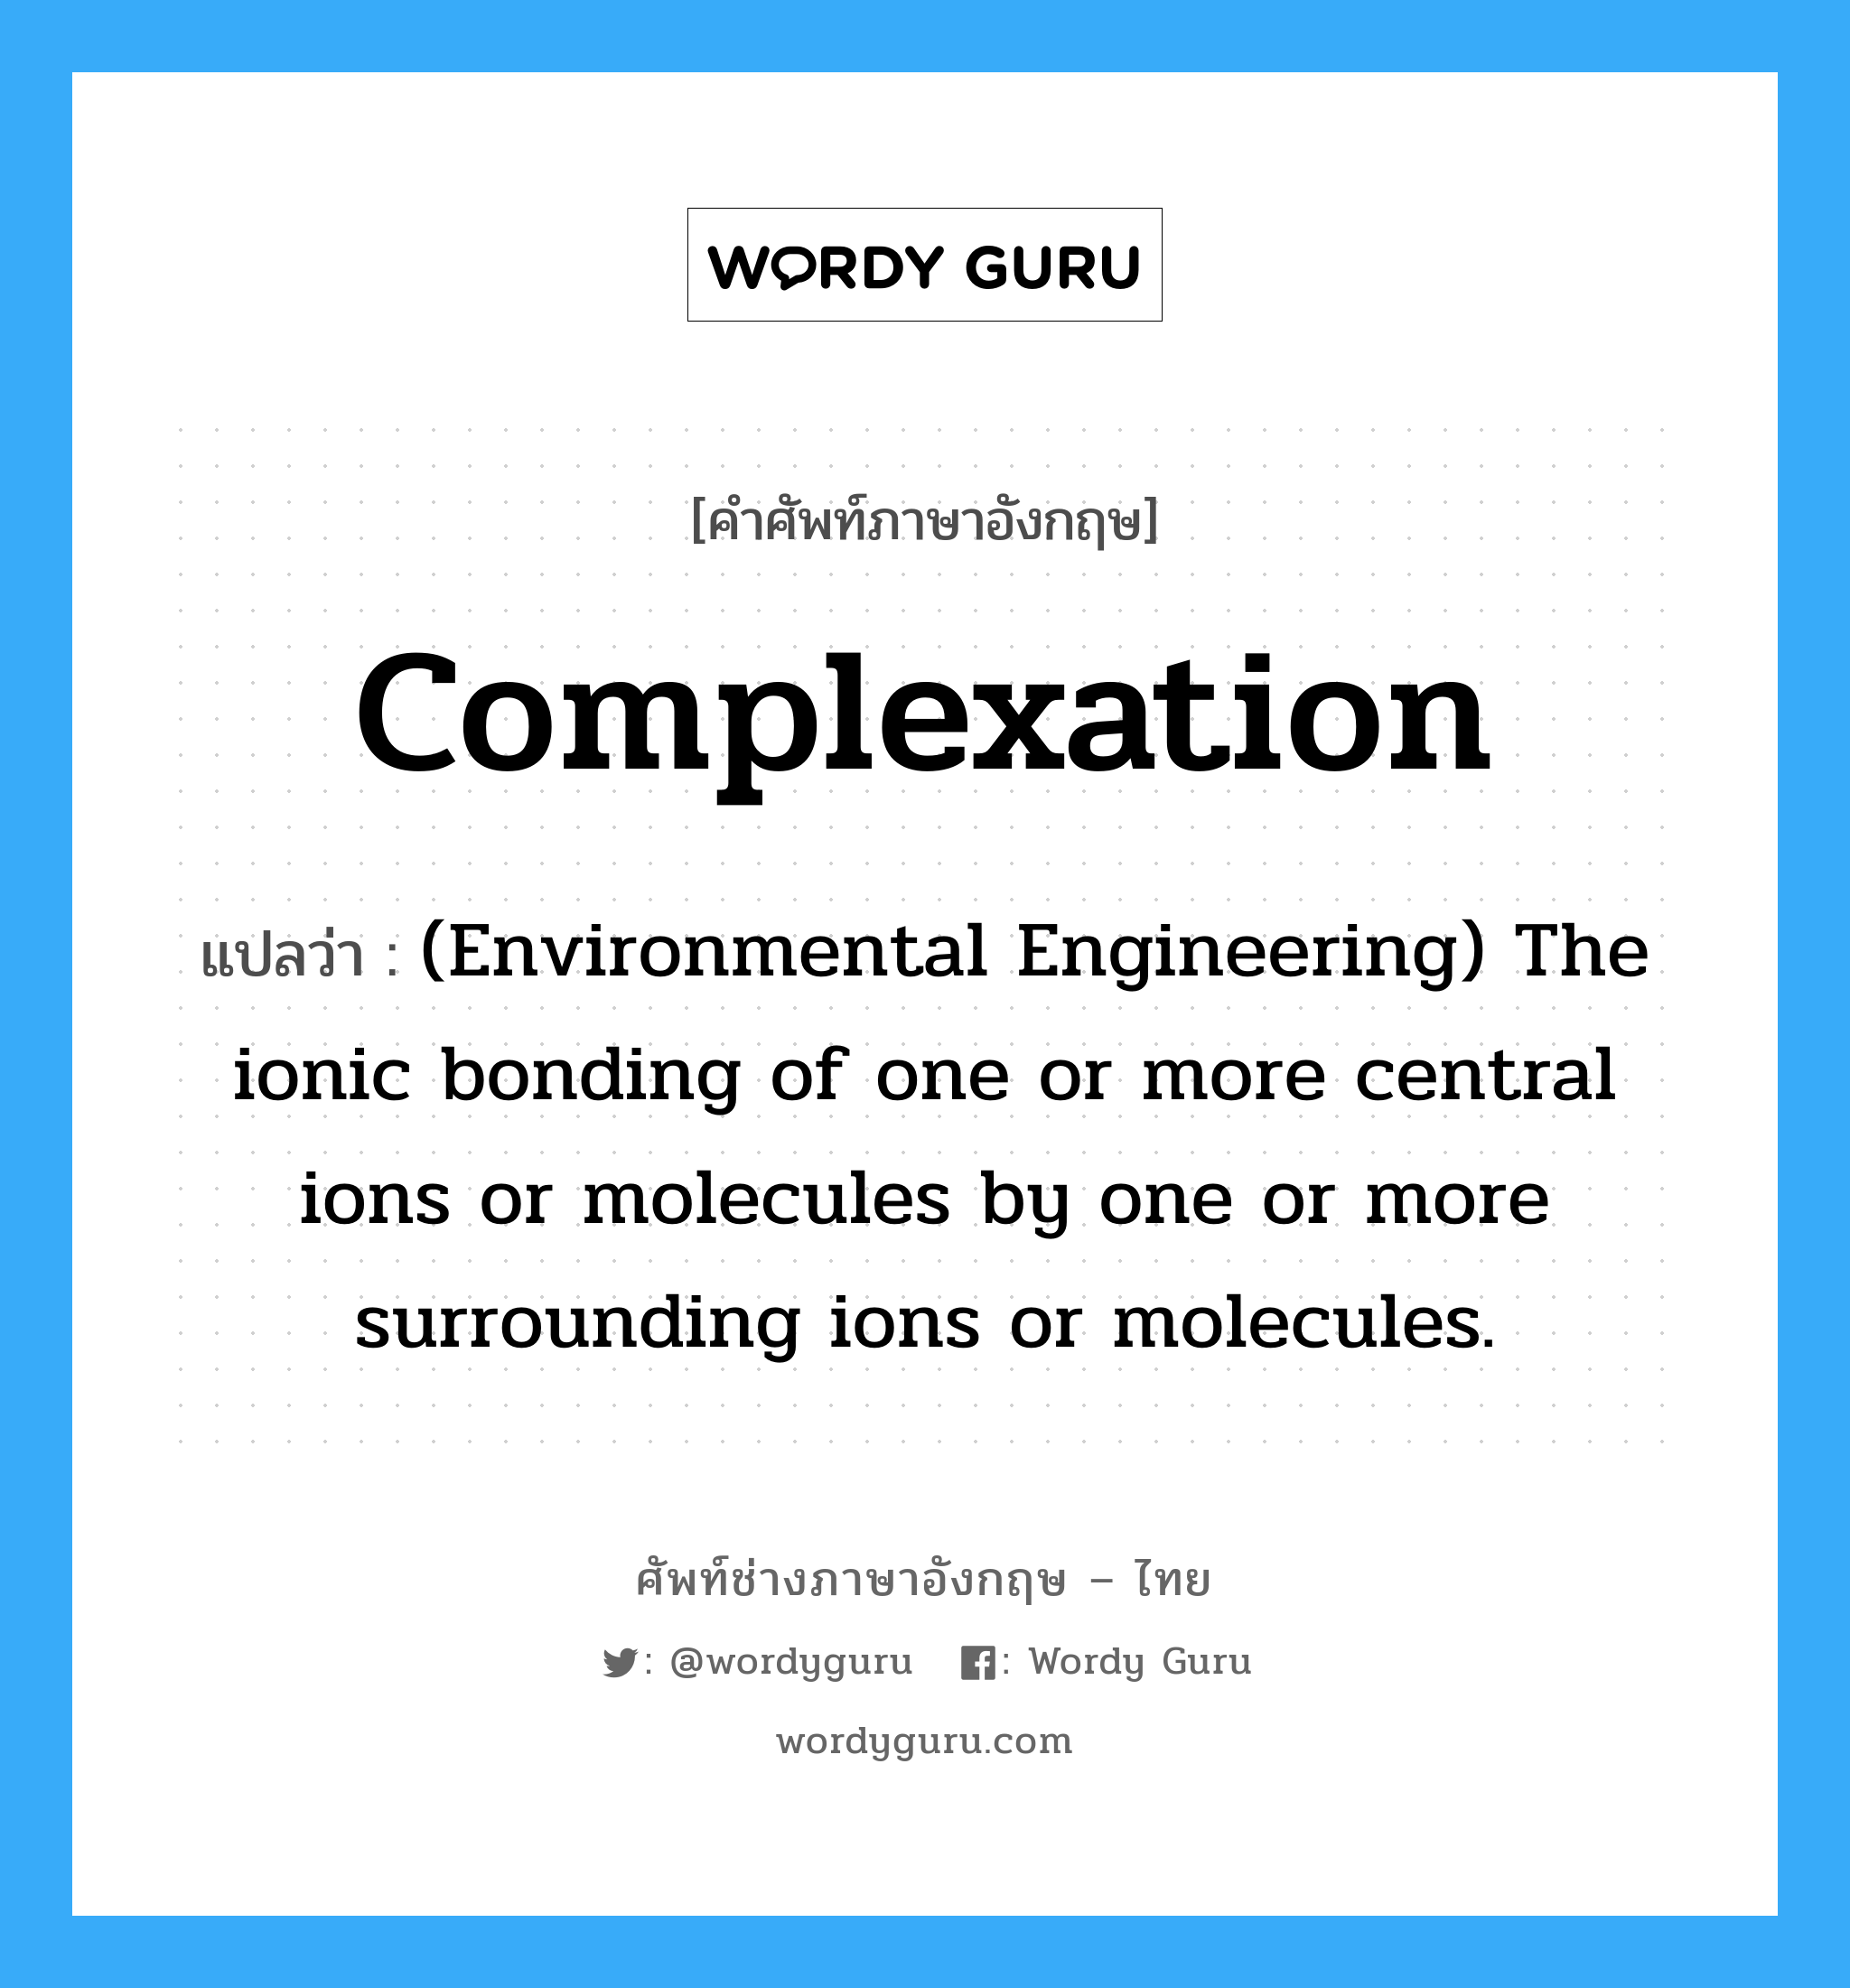 Complexation แปลว่า?, คำศัพท์ช่างภาษาอังกฤษ - ไทย Complexation คำศัพท์ภาษาอังกฤษ Complexation แปลว่า (Environmental Engineering) The ionic bonding of one or more central ions or molecules by one or more surrounding ions or molecules.